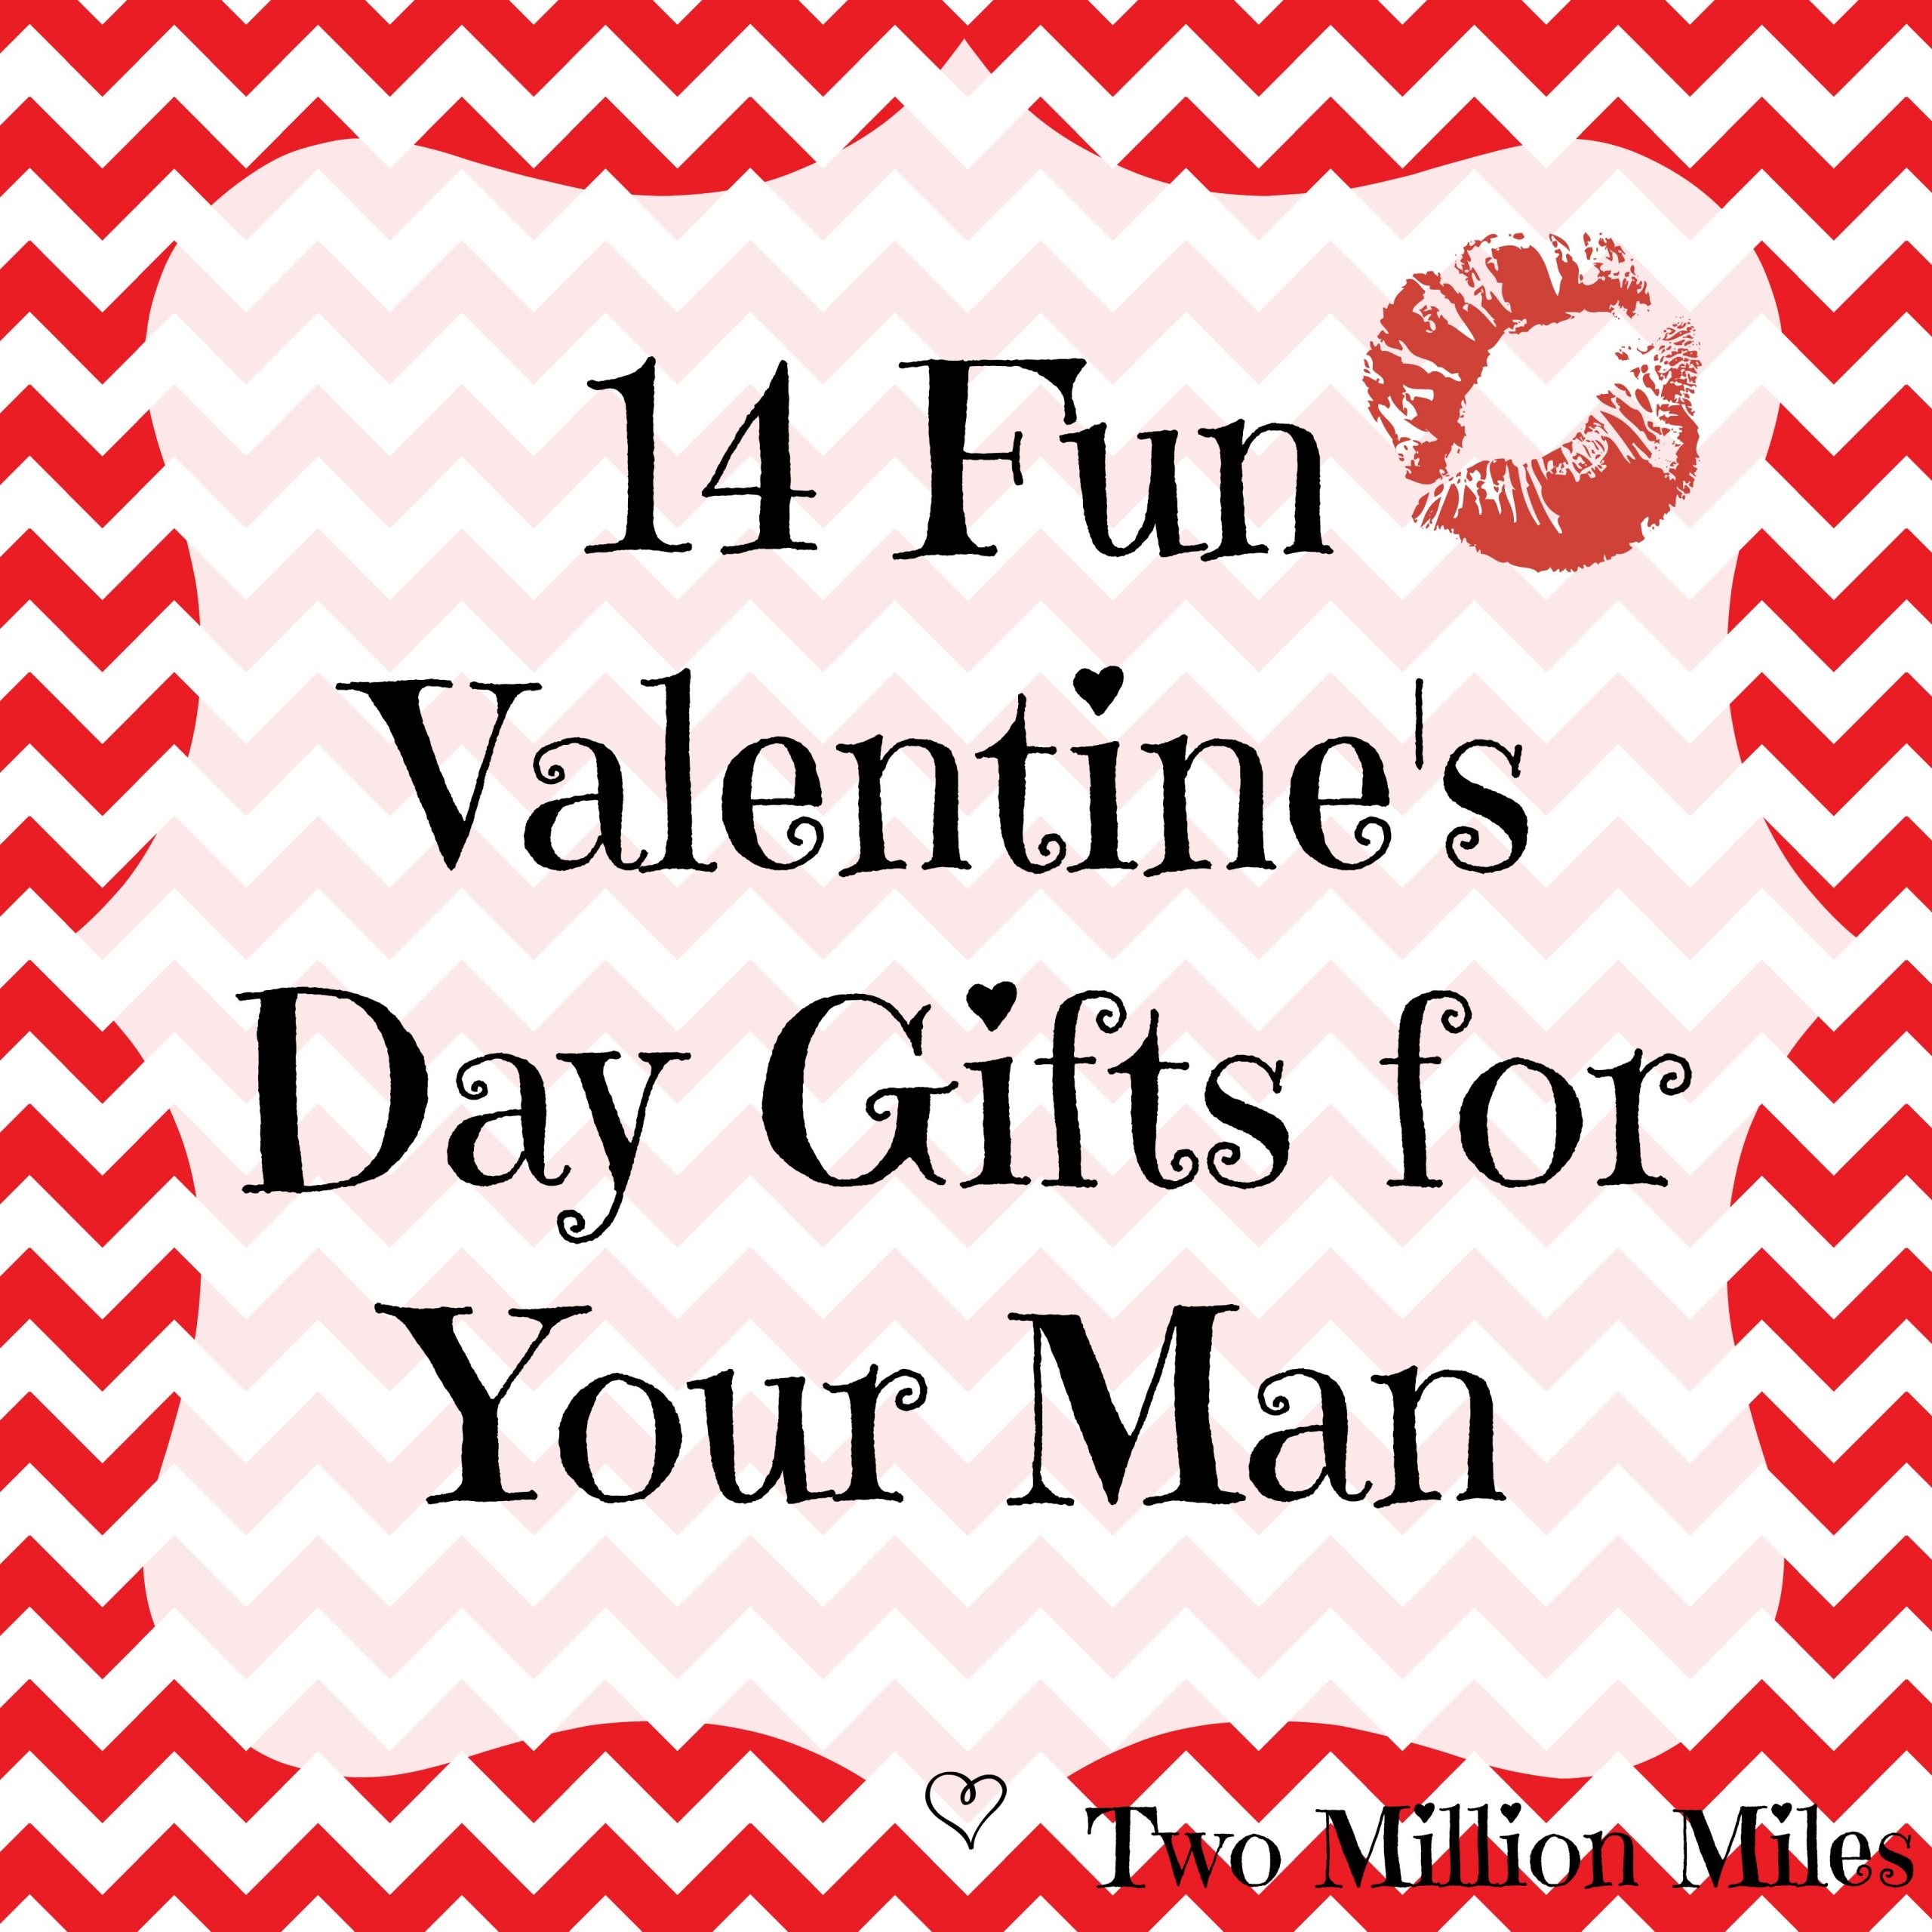 Guy Gift Ideas For Valentines Day
 14 Valentine’s Day Gifts for Your Man